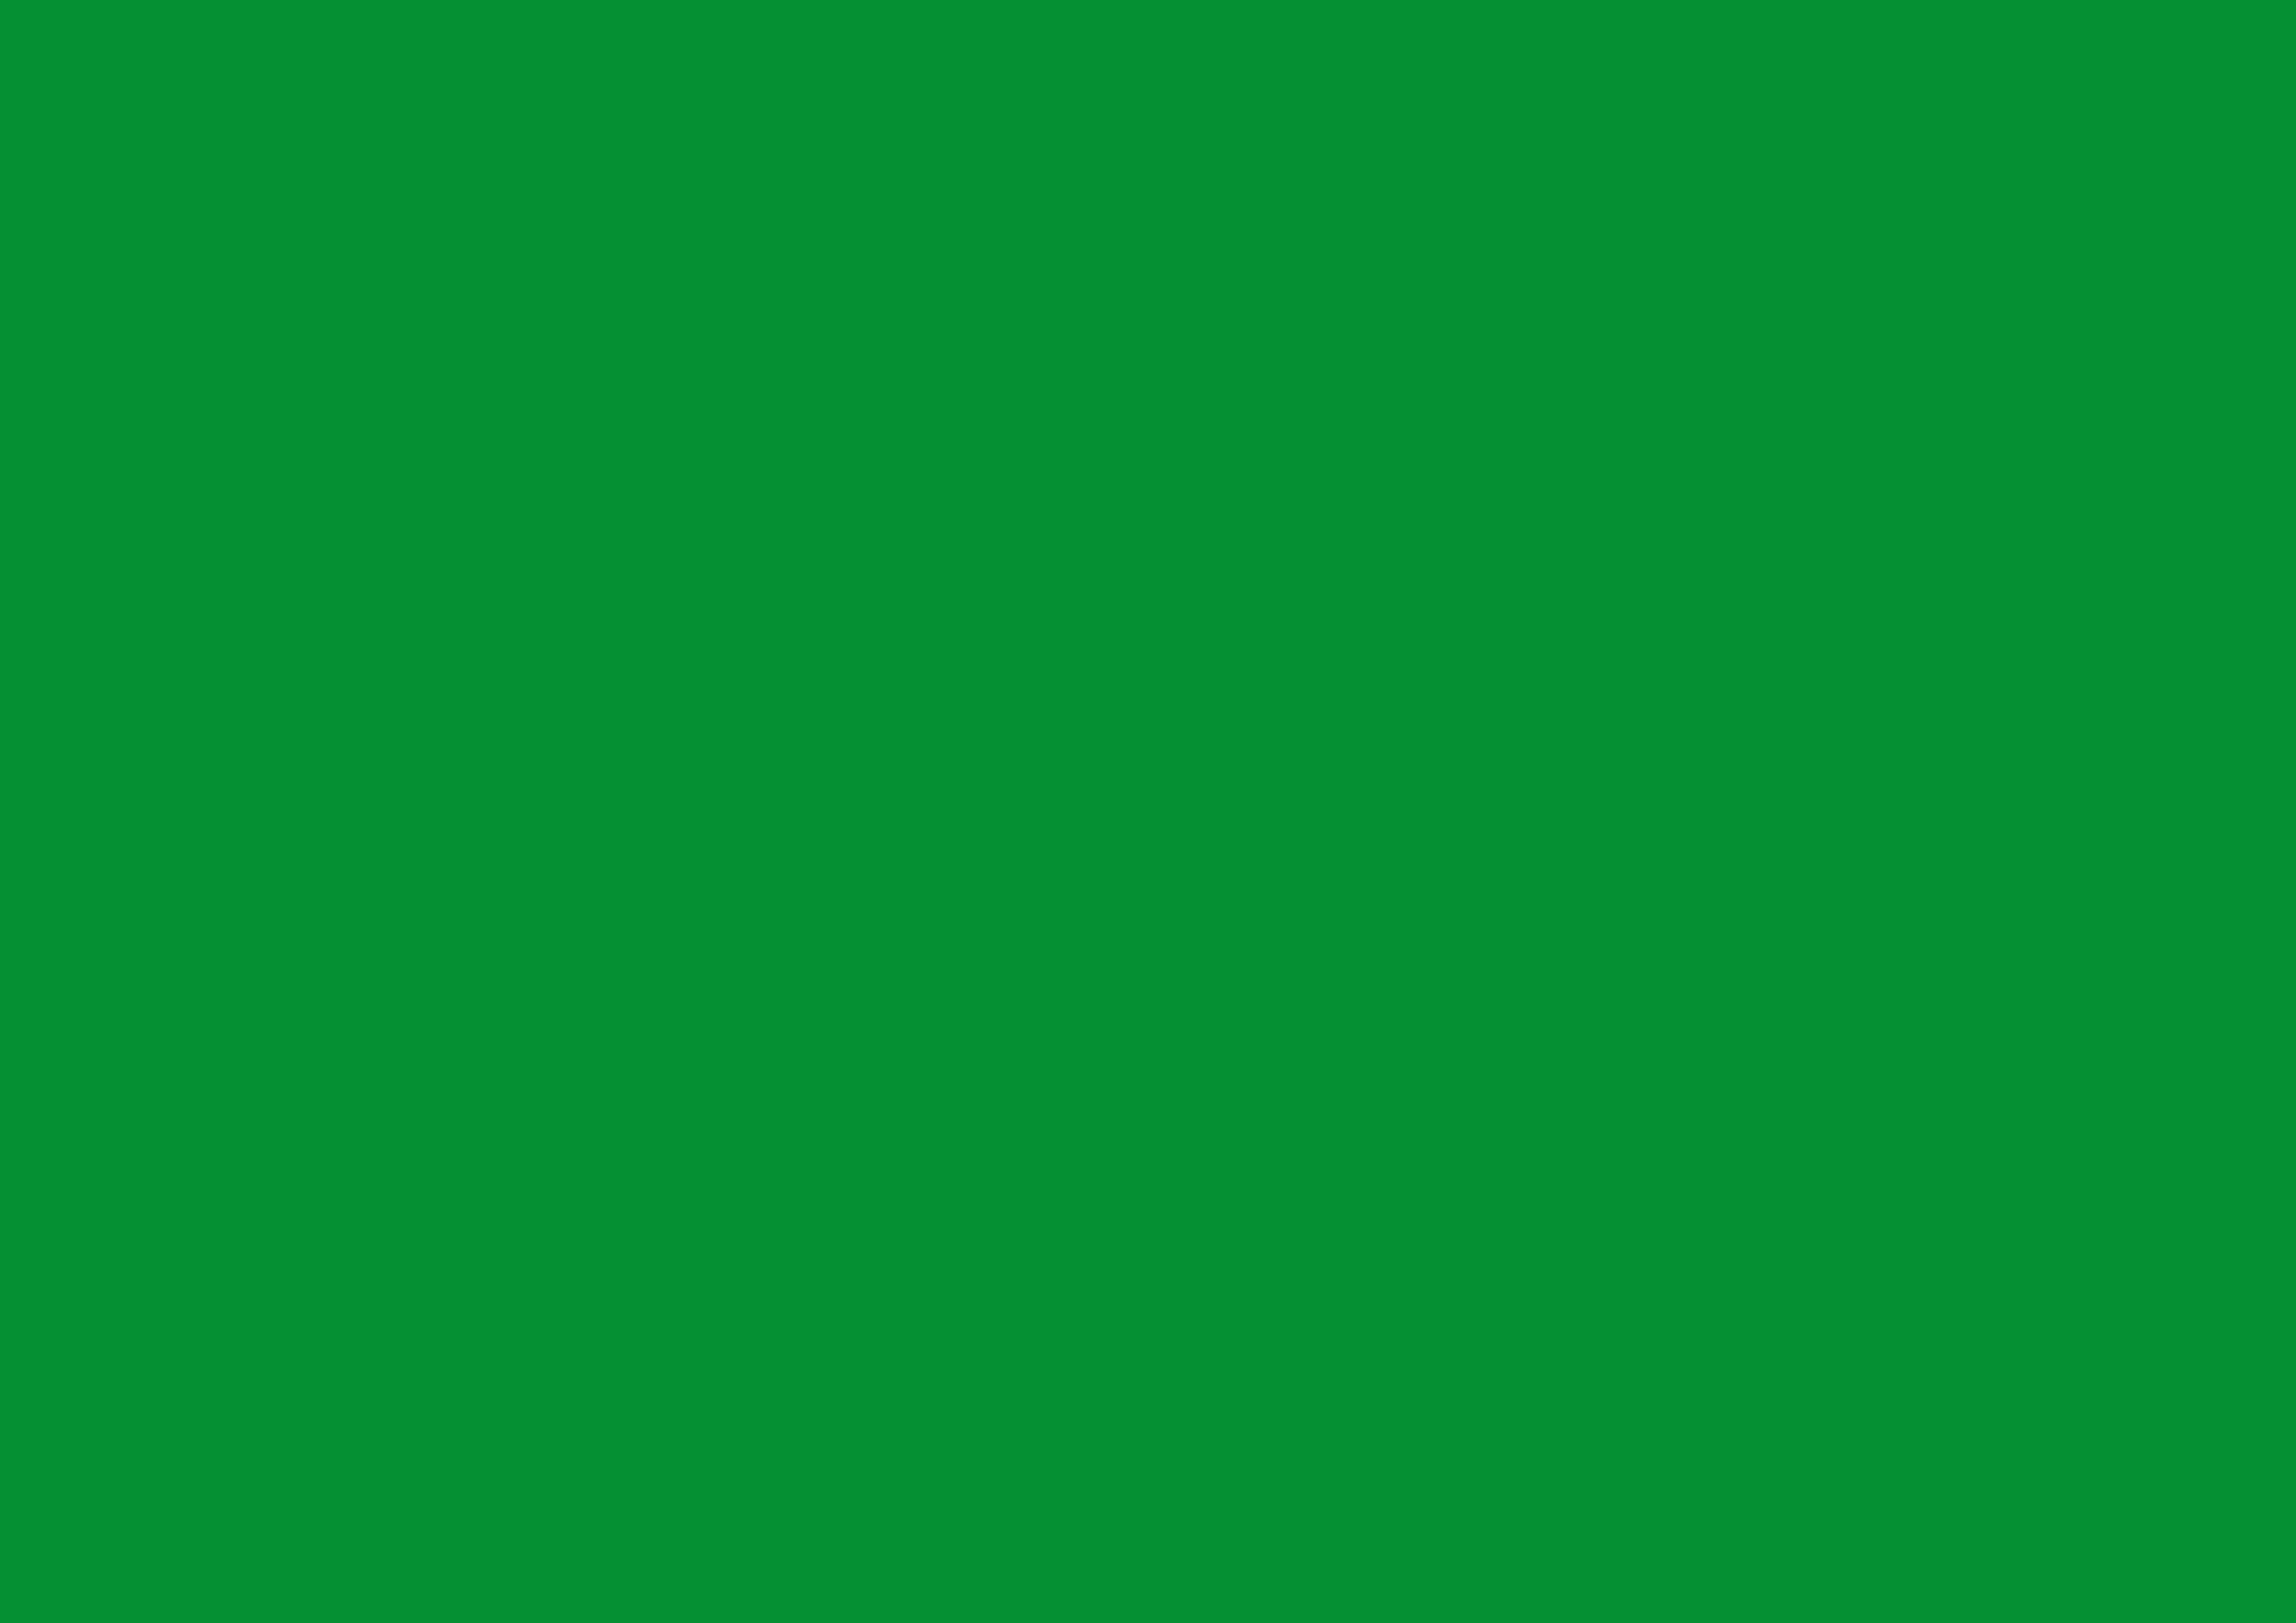 3508x2480 North Texas Green Solid Color Background